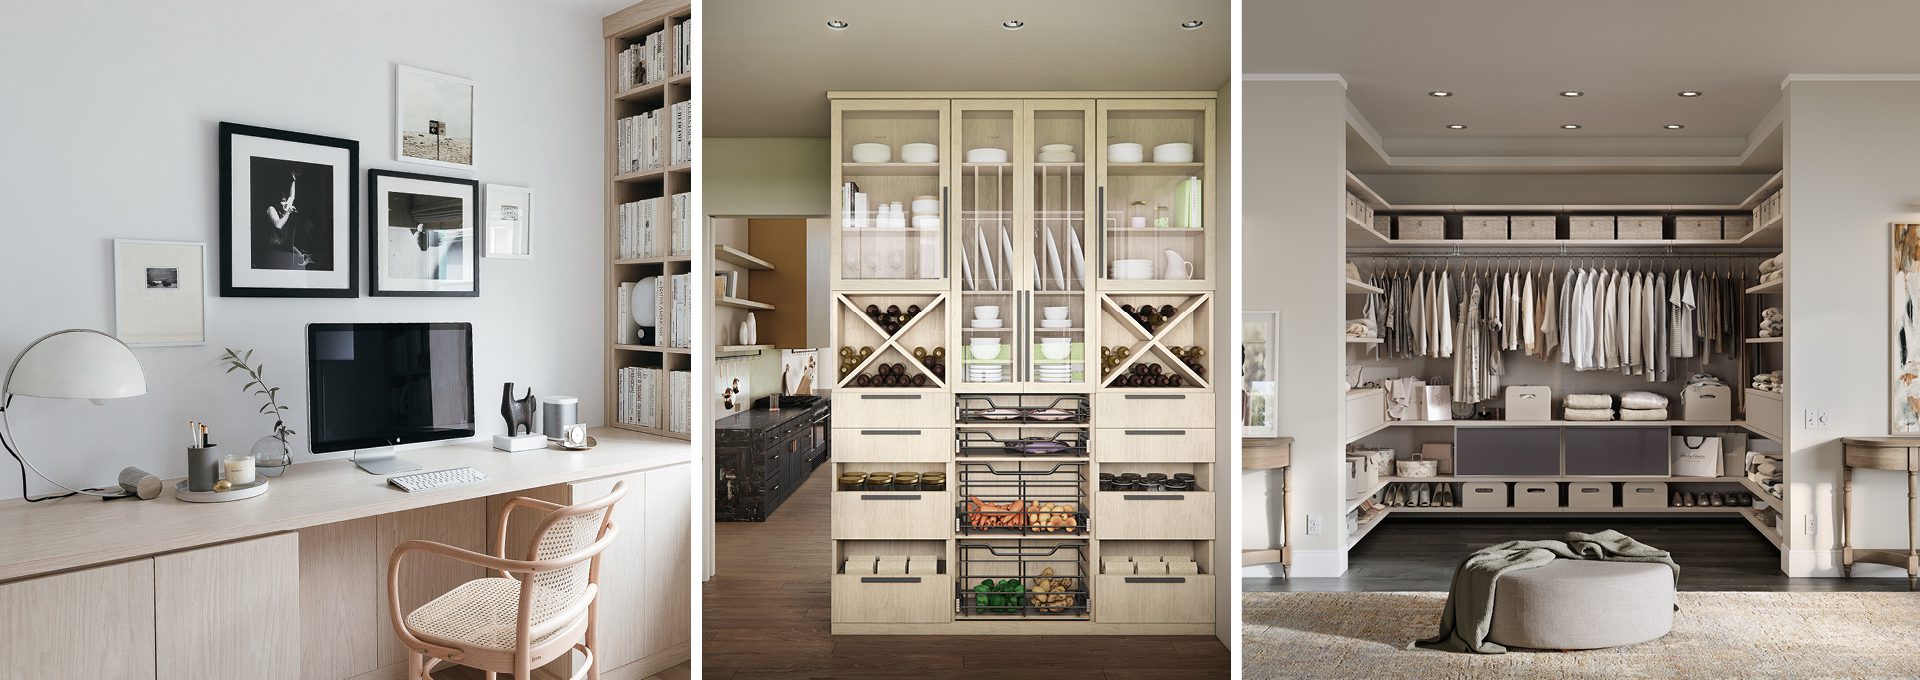 Enjoy the Spring Promotion Event with up to $2,500 savings for new walk in closet, media center, or kitchen pantry in California Closets.